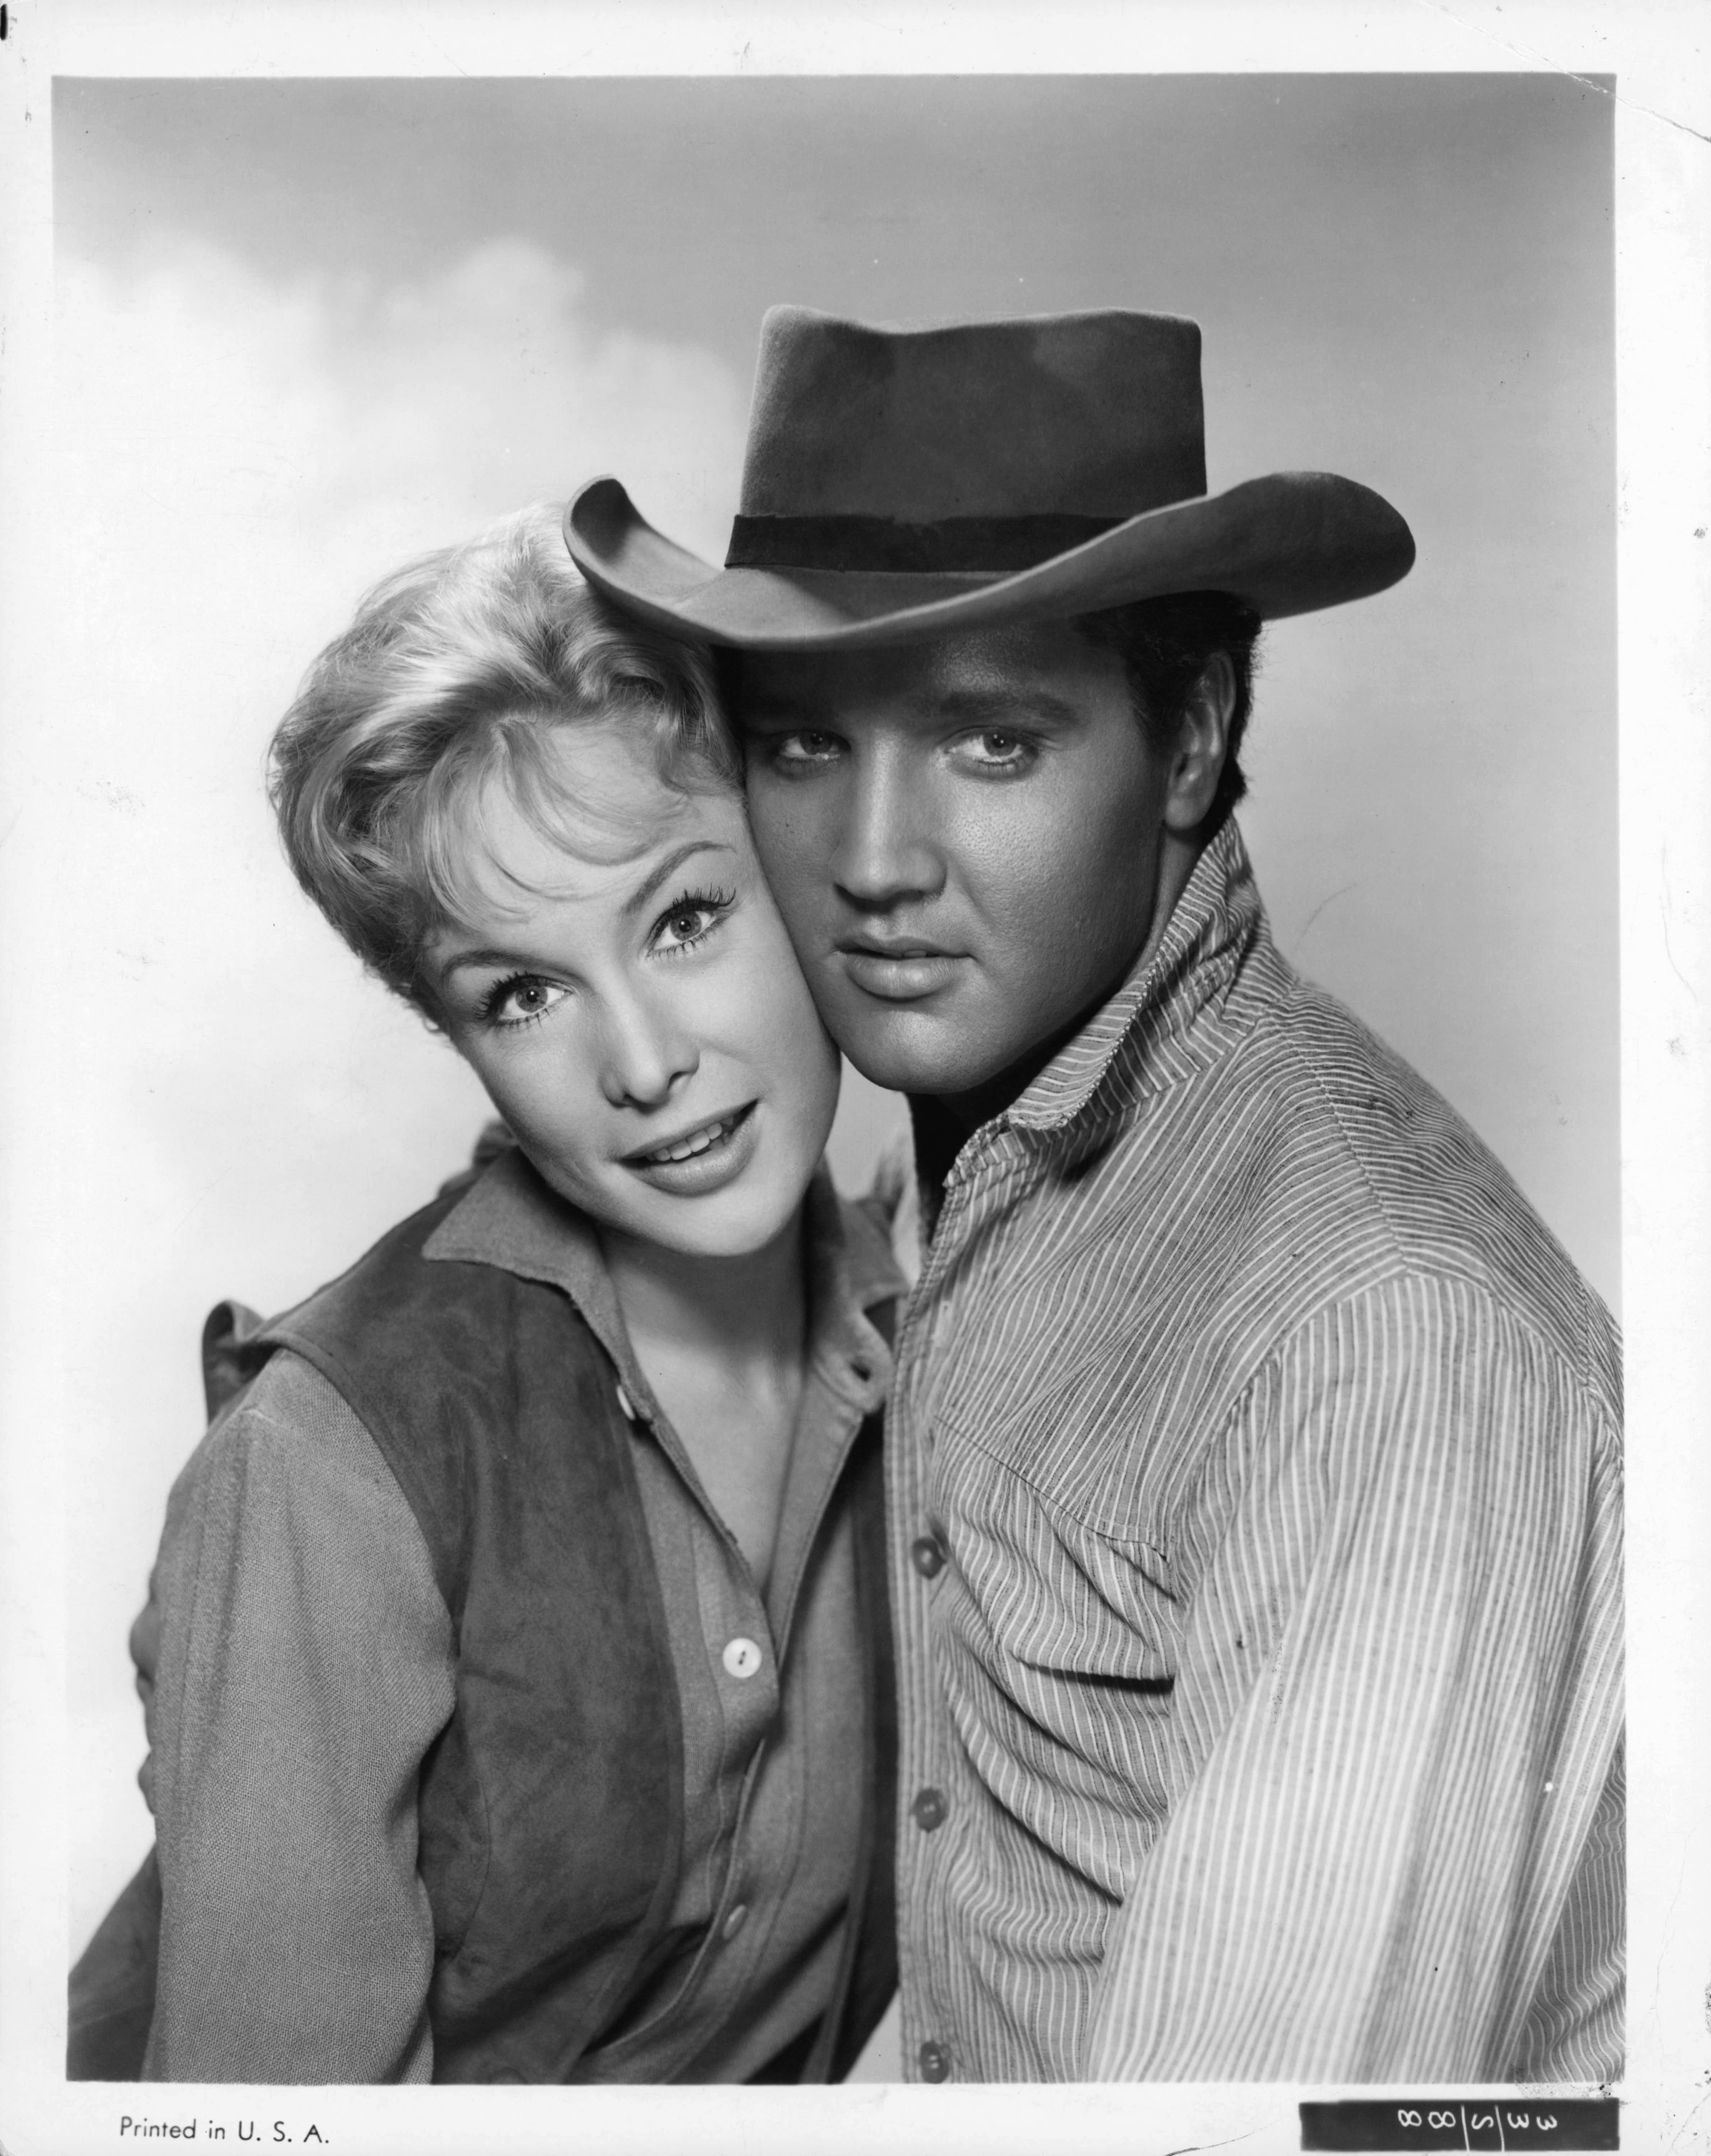 A portrait of Barbara Eden and Elvis Presley for the 1960 film "Flaming Star." | Source: Getty Images